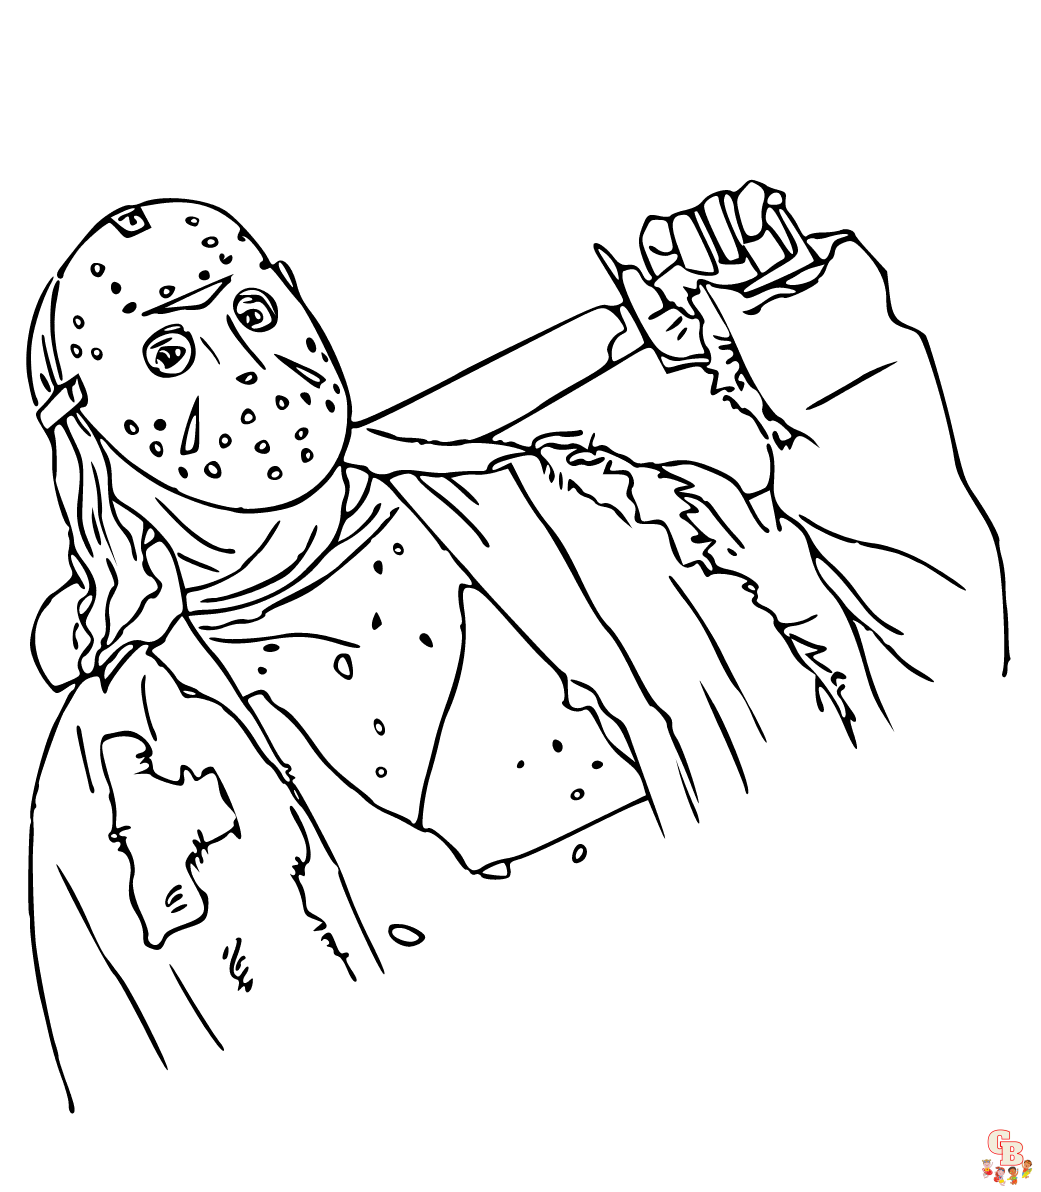 Friday the 13th Coloring Sheets Free